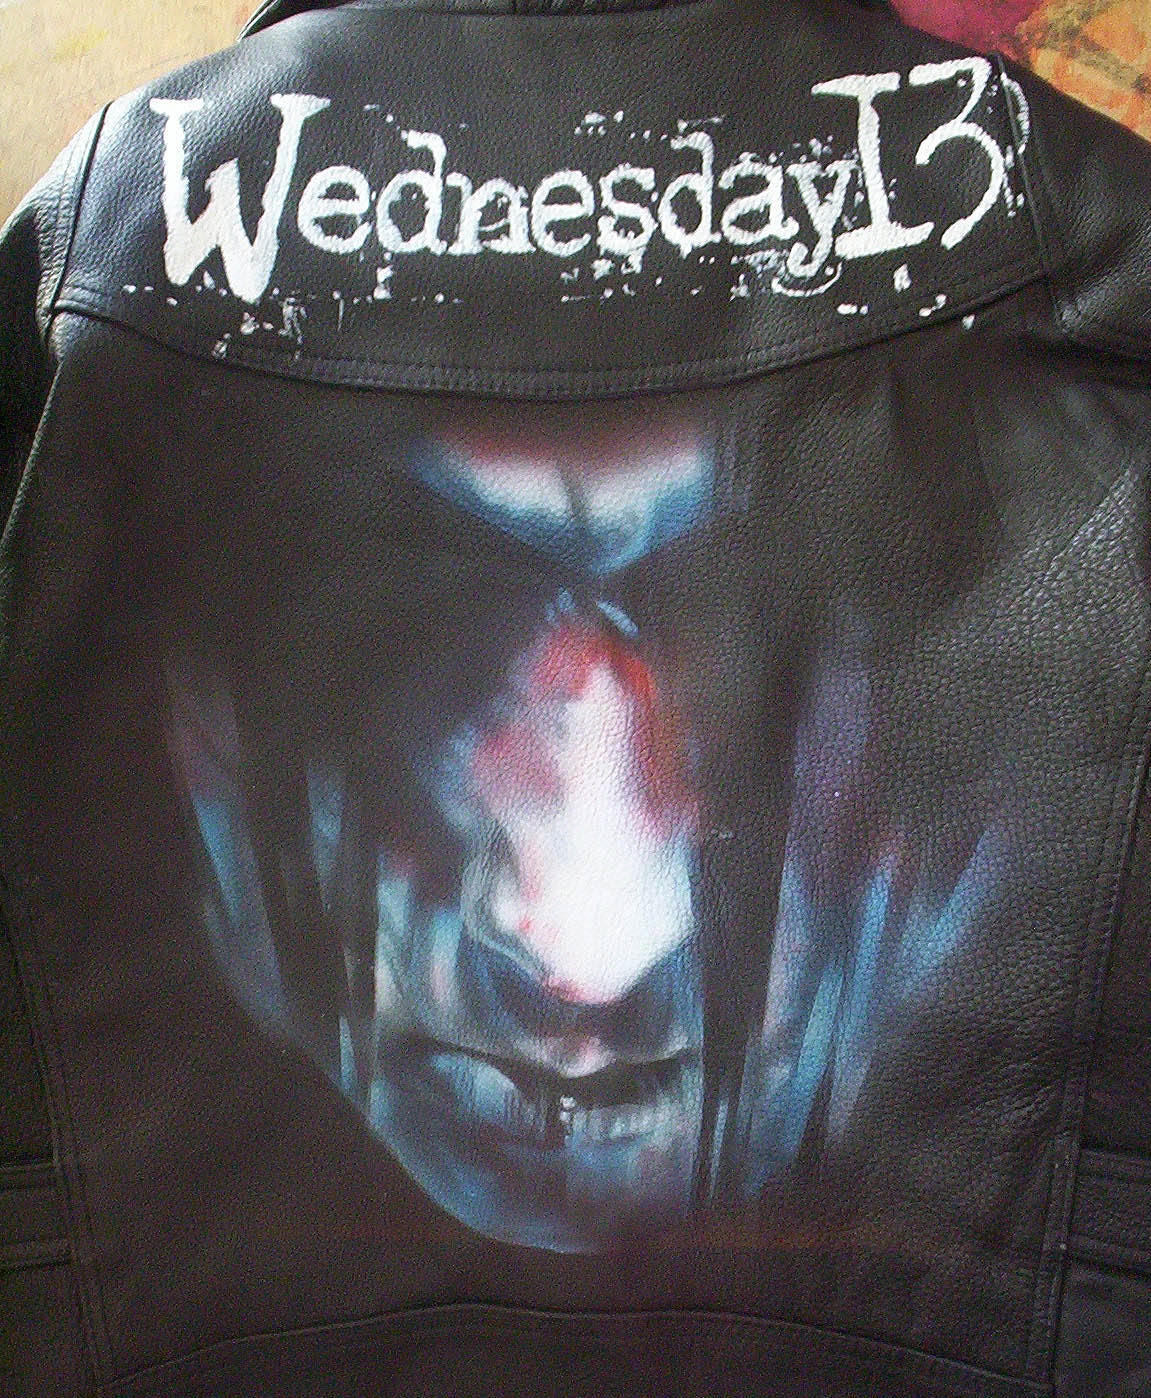 Airbrush on black leather by hotleather